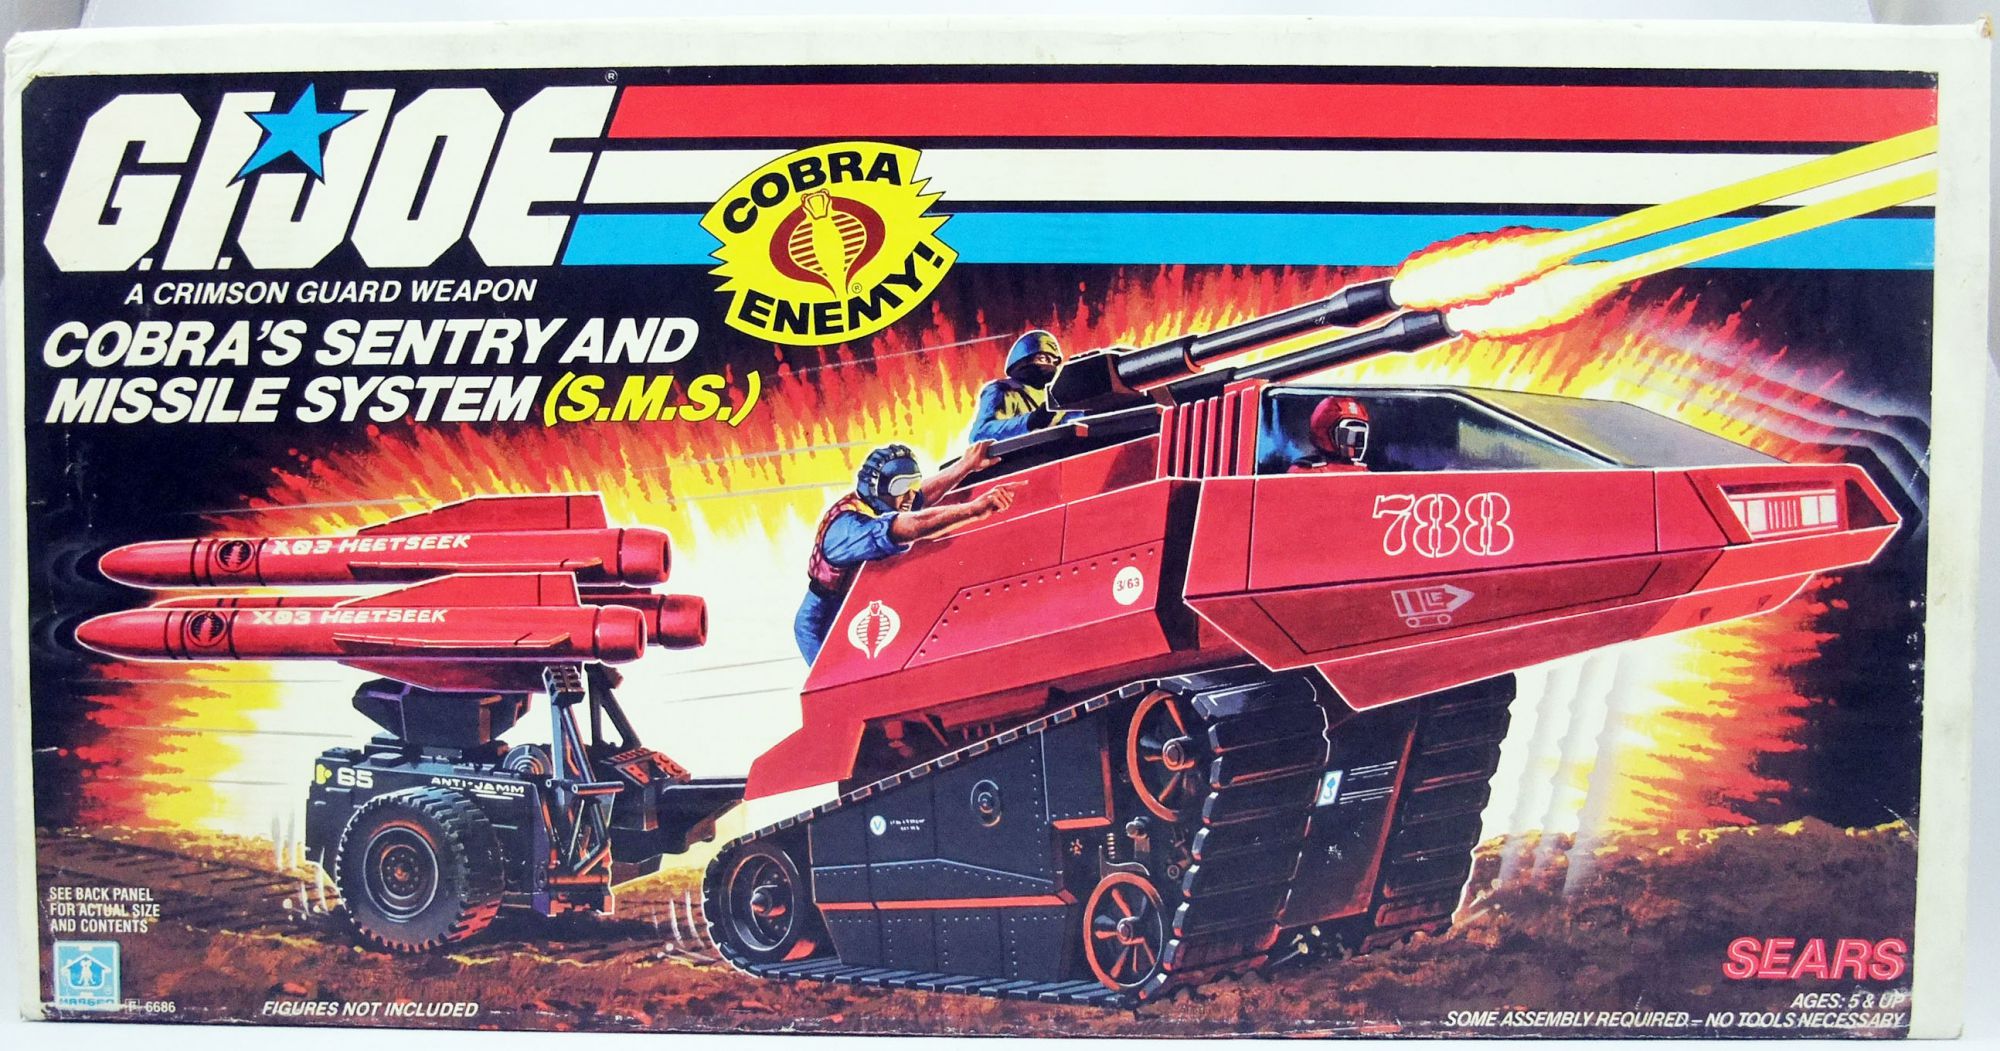 G.I.JOE - 1985 - Cobra's Sentry and Missile System (S.M.S.) - Sears